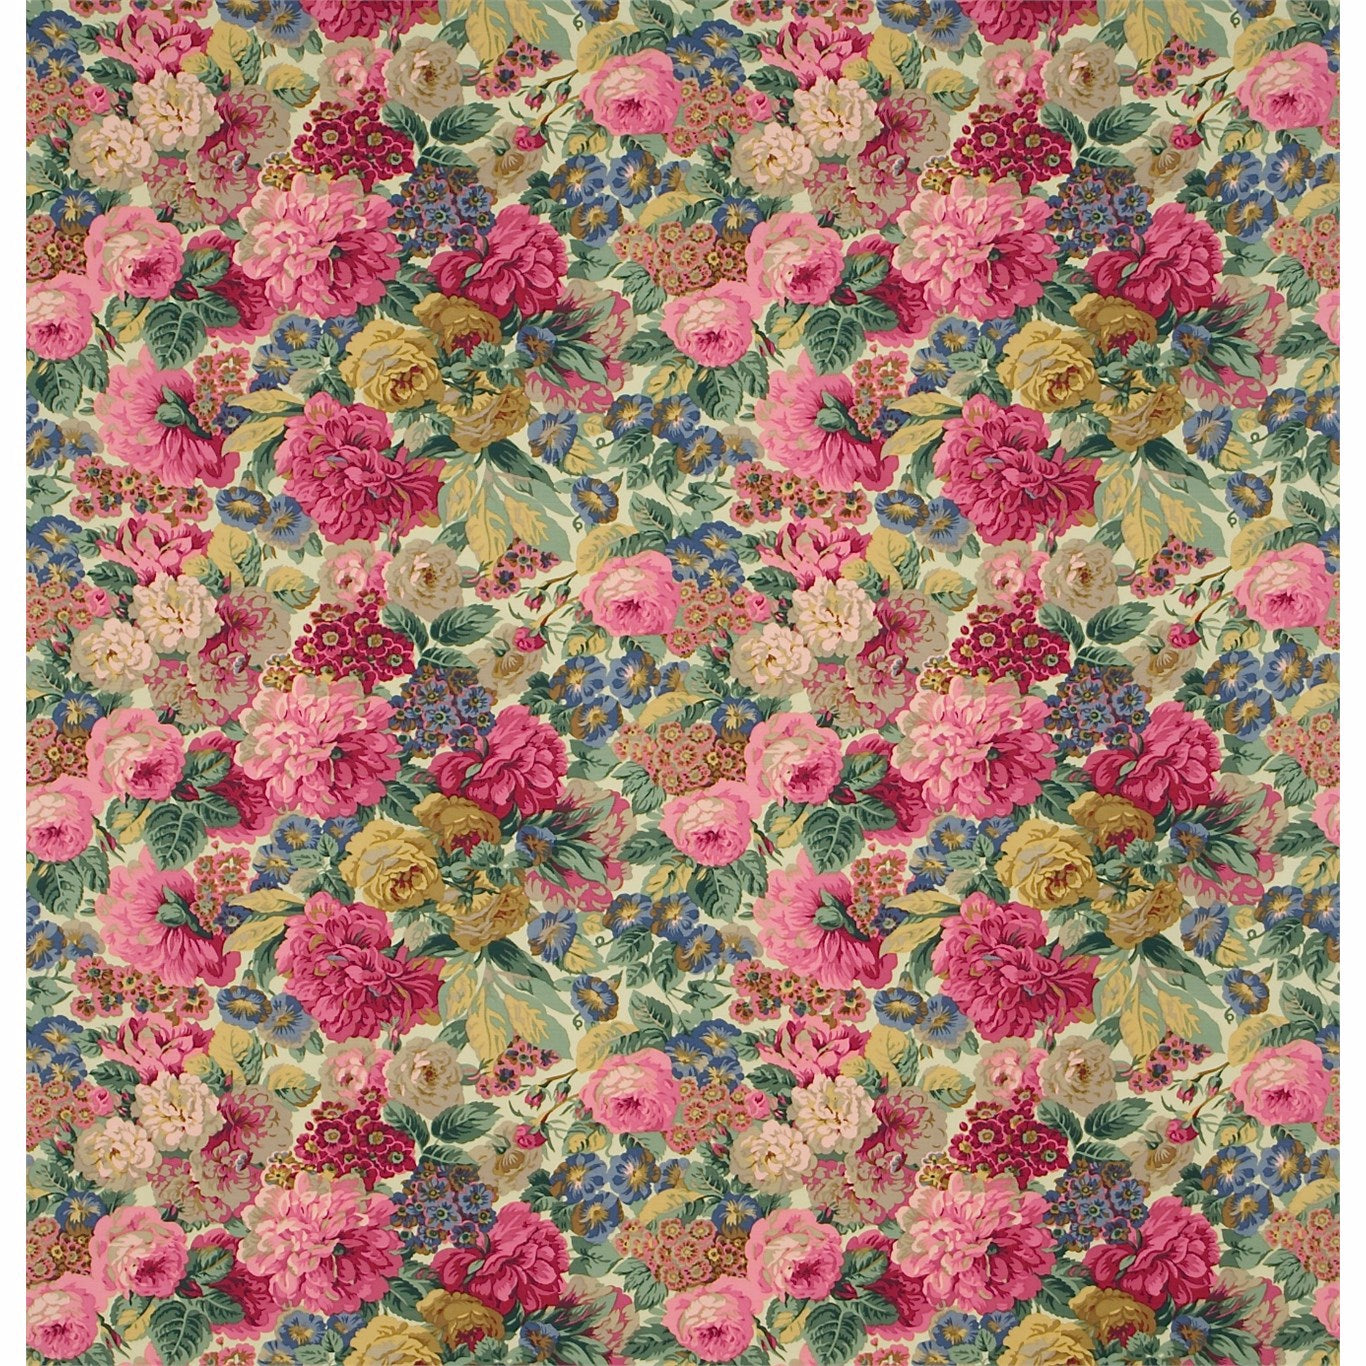 Rose and Peony Red (Linen) Fabric By Sanderson